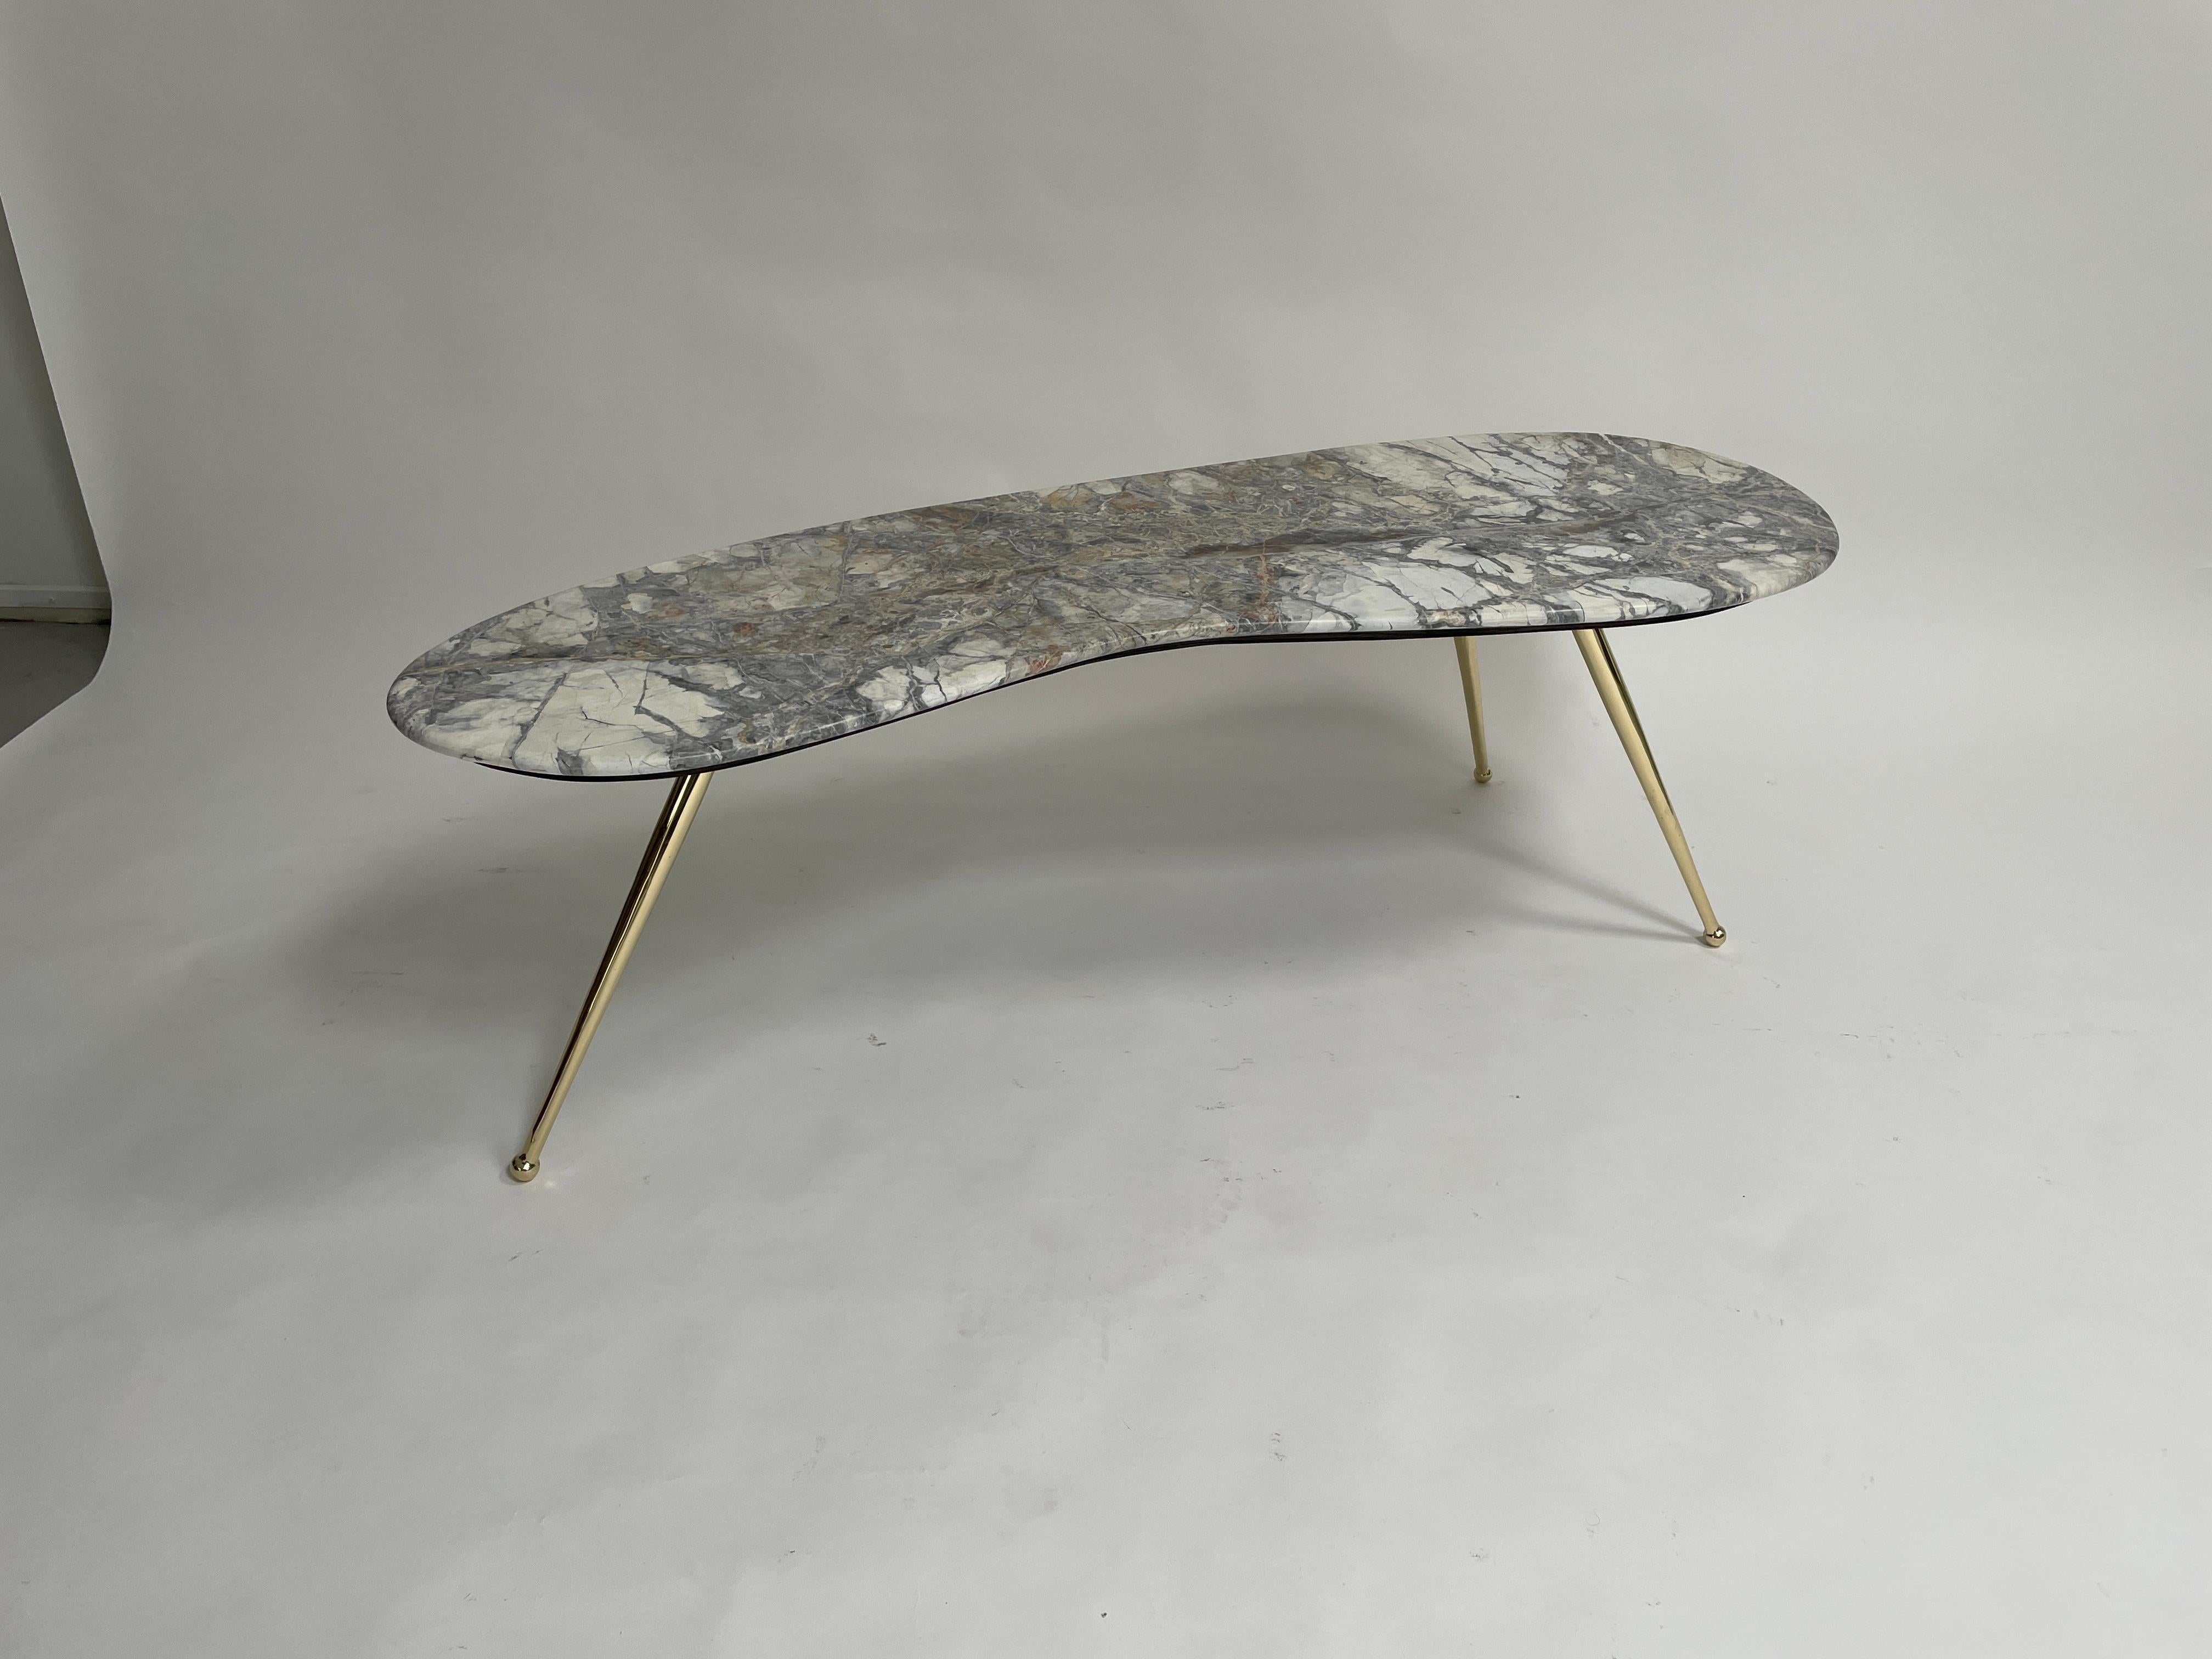 Contemporary Briance Coffee Table, by Bourgeois Boheme Atelier For Sale